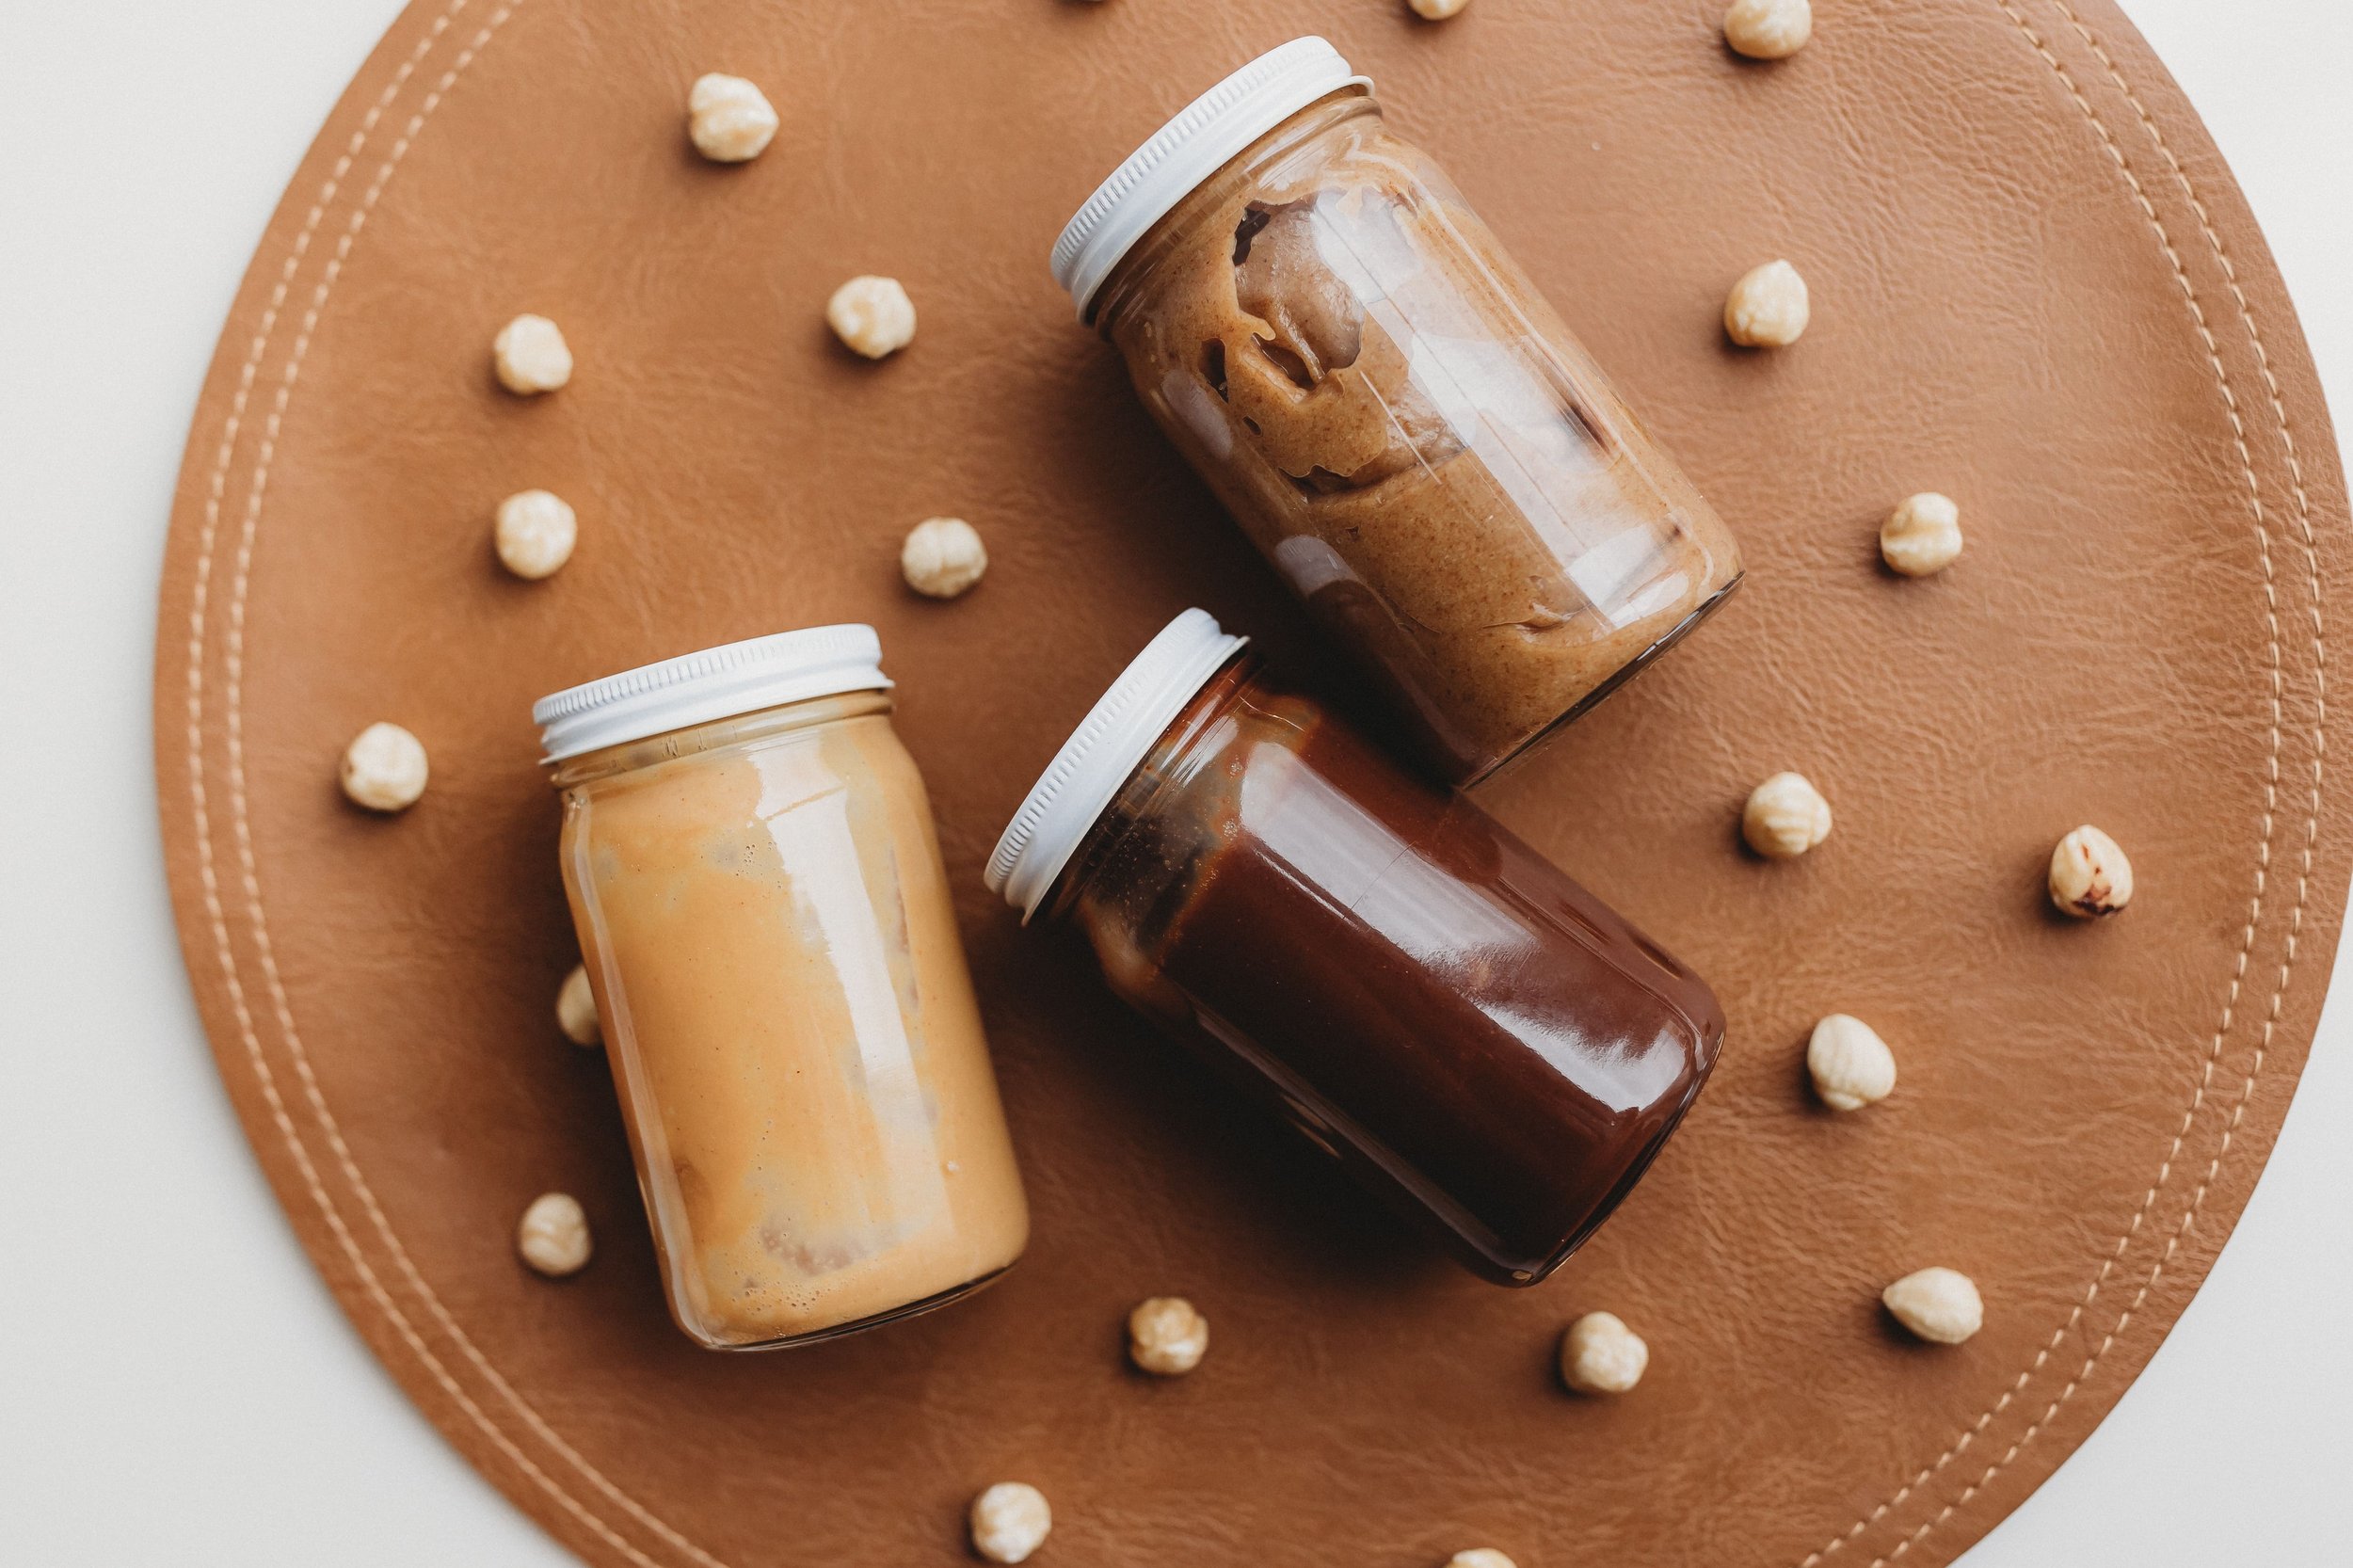  three jars of spreads sit during a food photo shoot 